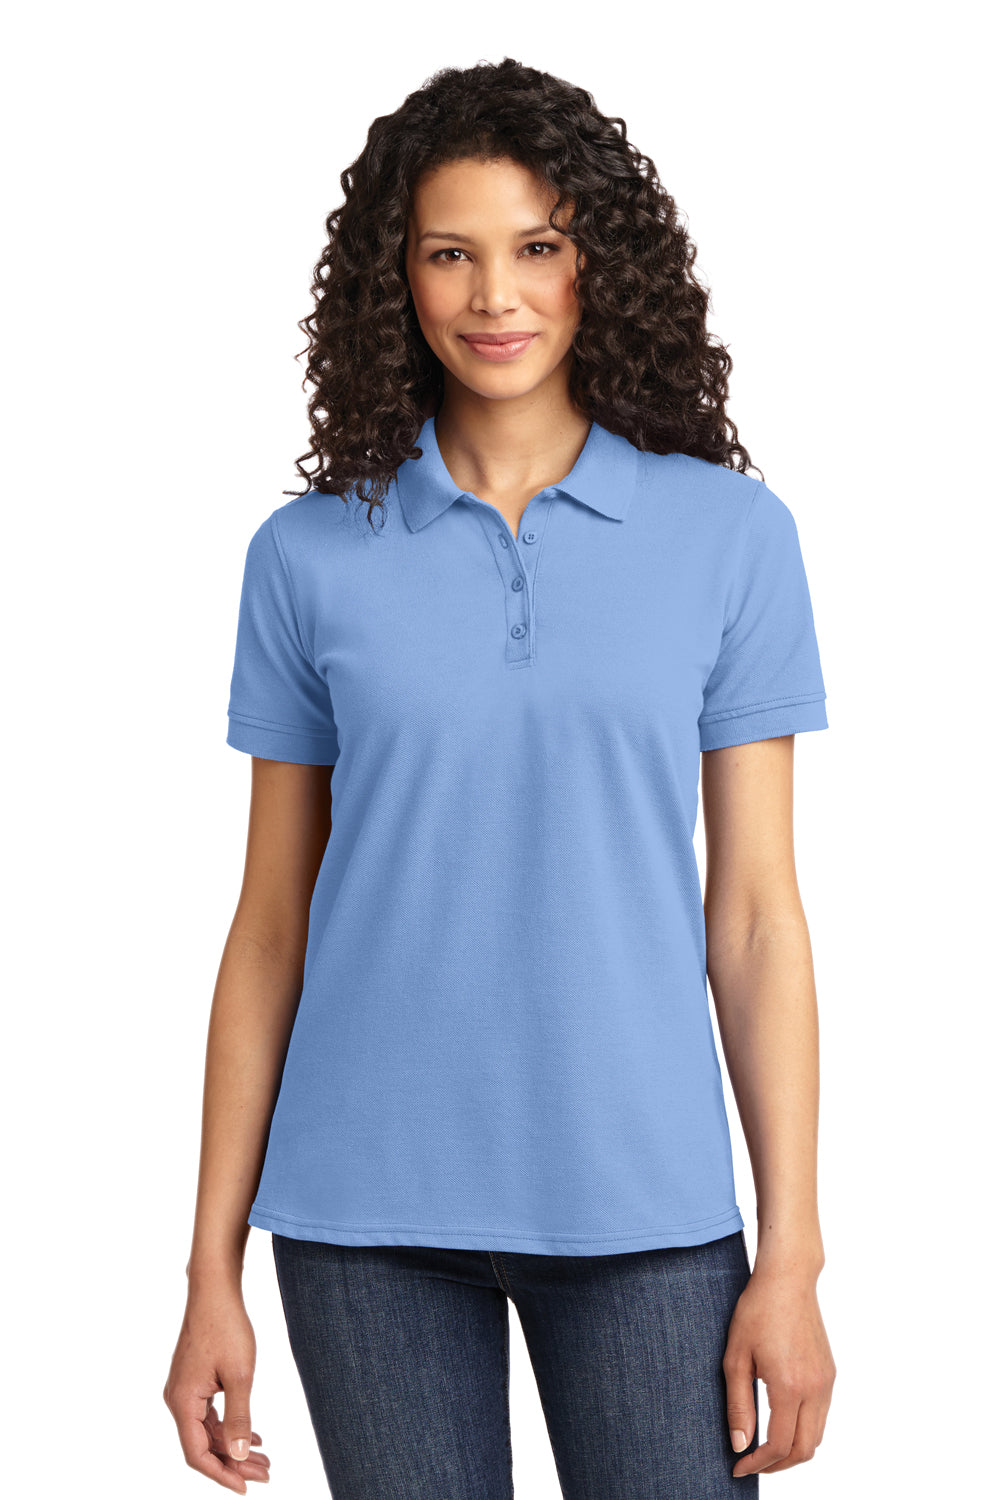 Port & Company LKP155 Womens Core Stain Resistant Short Sleeve Polo Shirt Light Blue Front